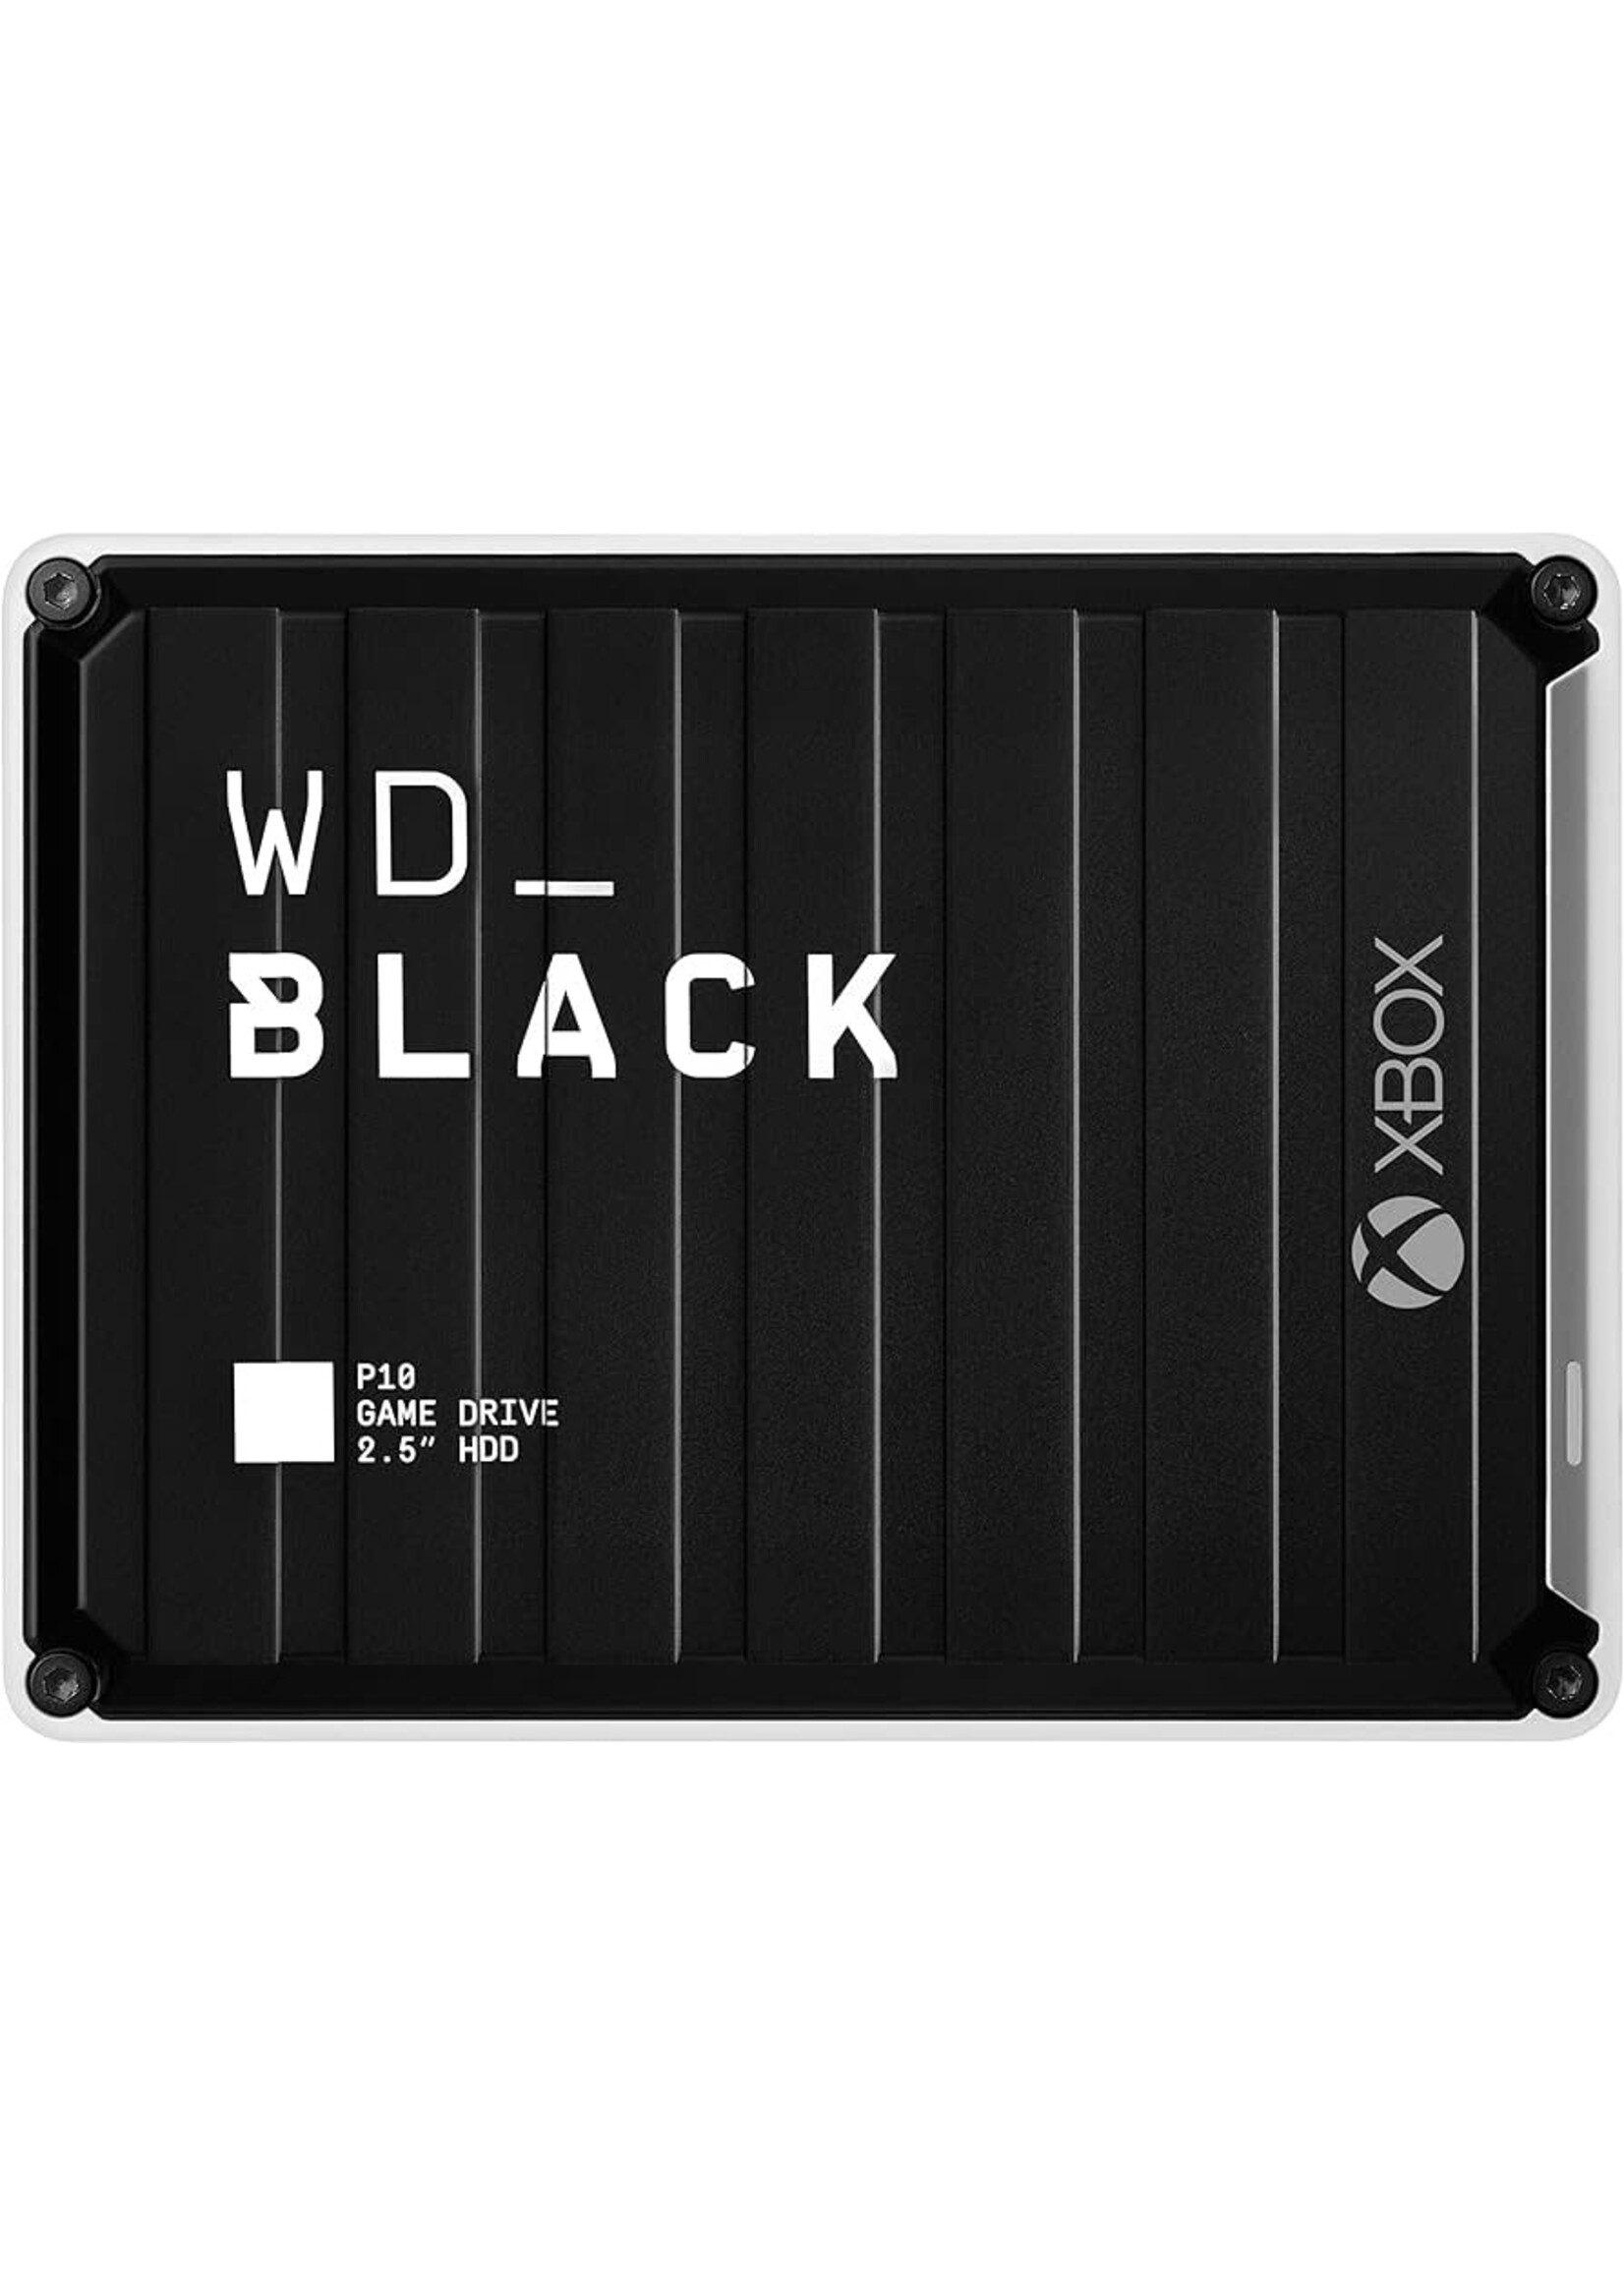 WD_Black 5TB Game Drive for XBOX/PS4/PS5